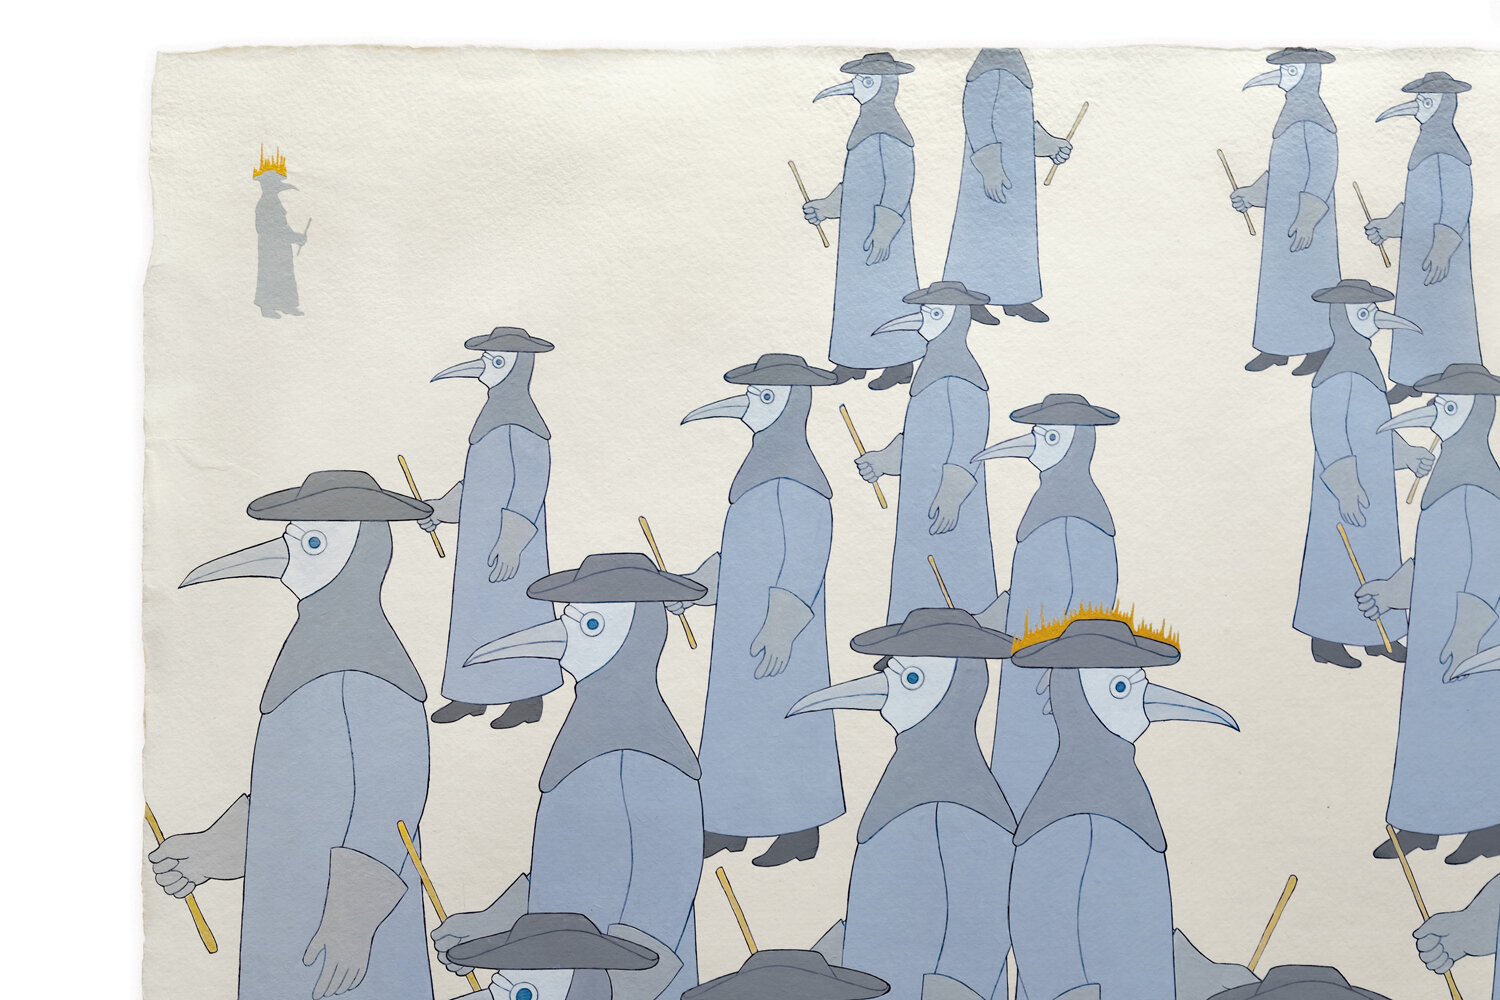   Plague Doctors (Inattention),  2021 Acrylic on paper, 22” x 30” 